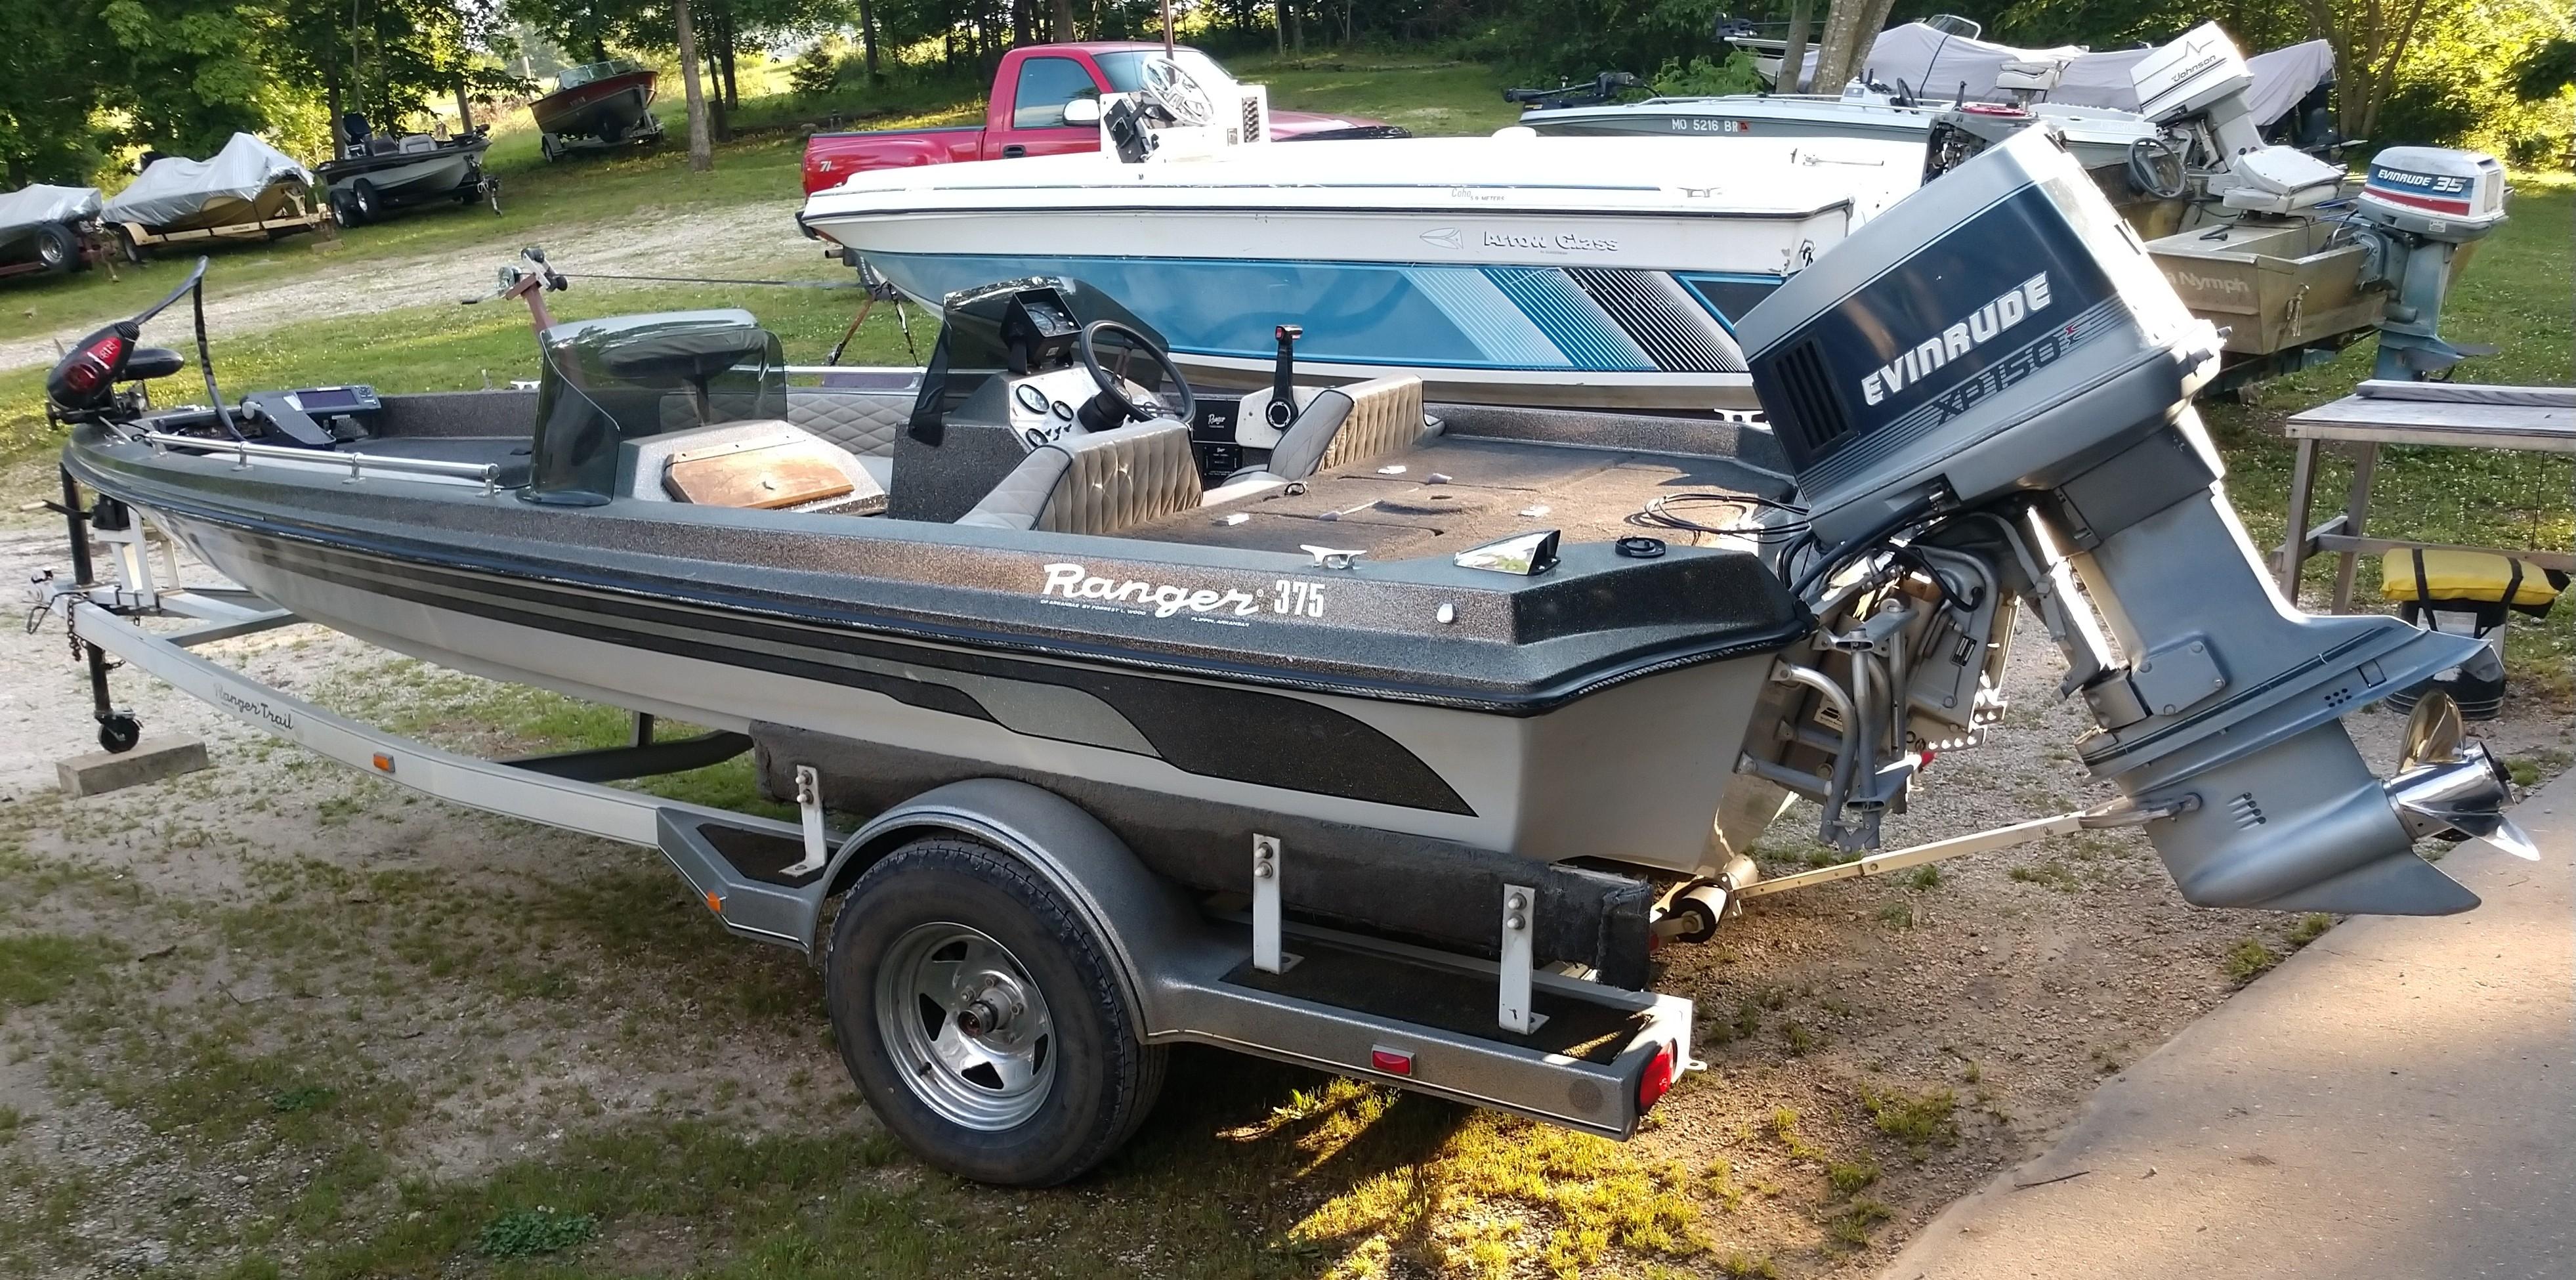 The Best Deal Youll Likely Find On A Retro Bass Boat Buy Sell